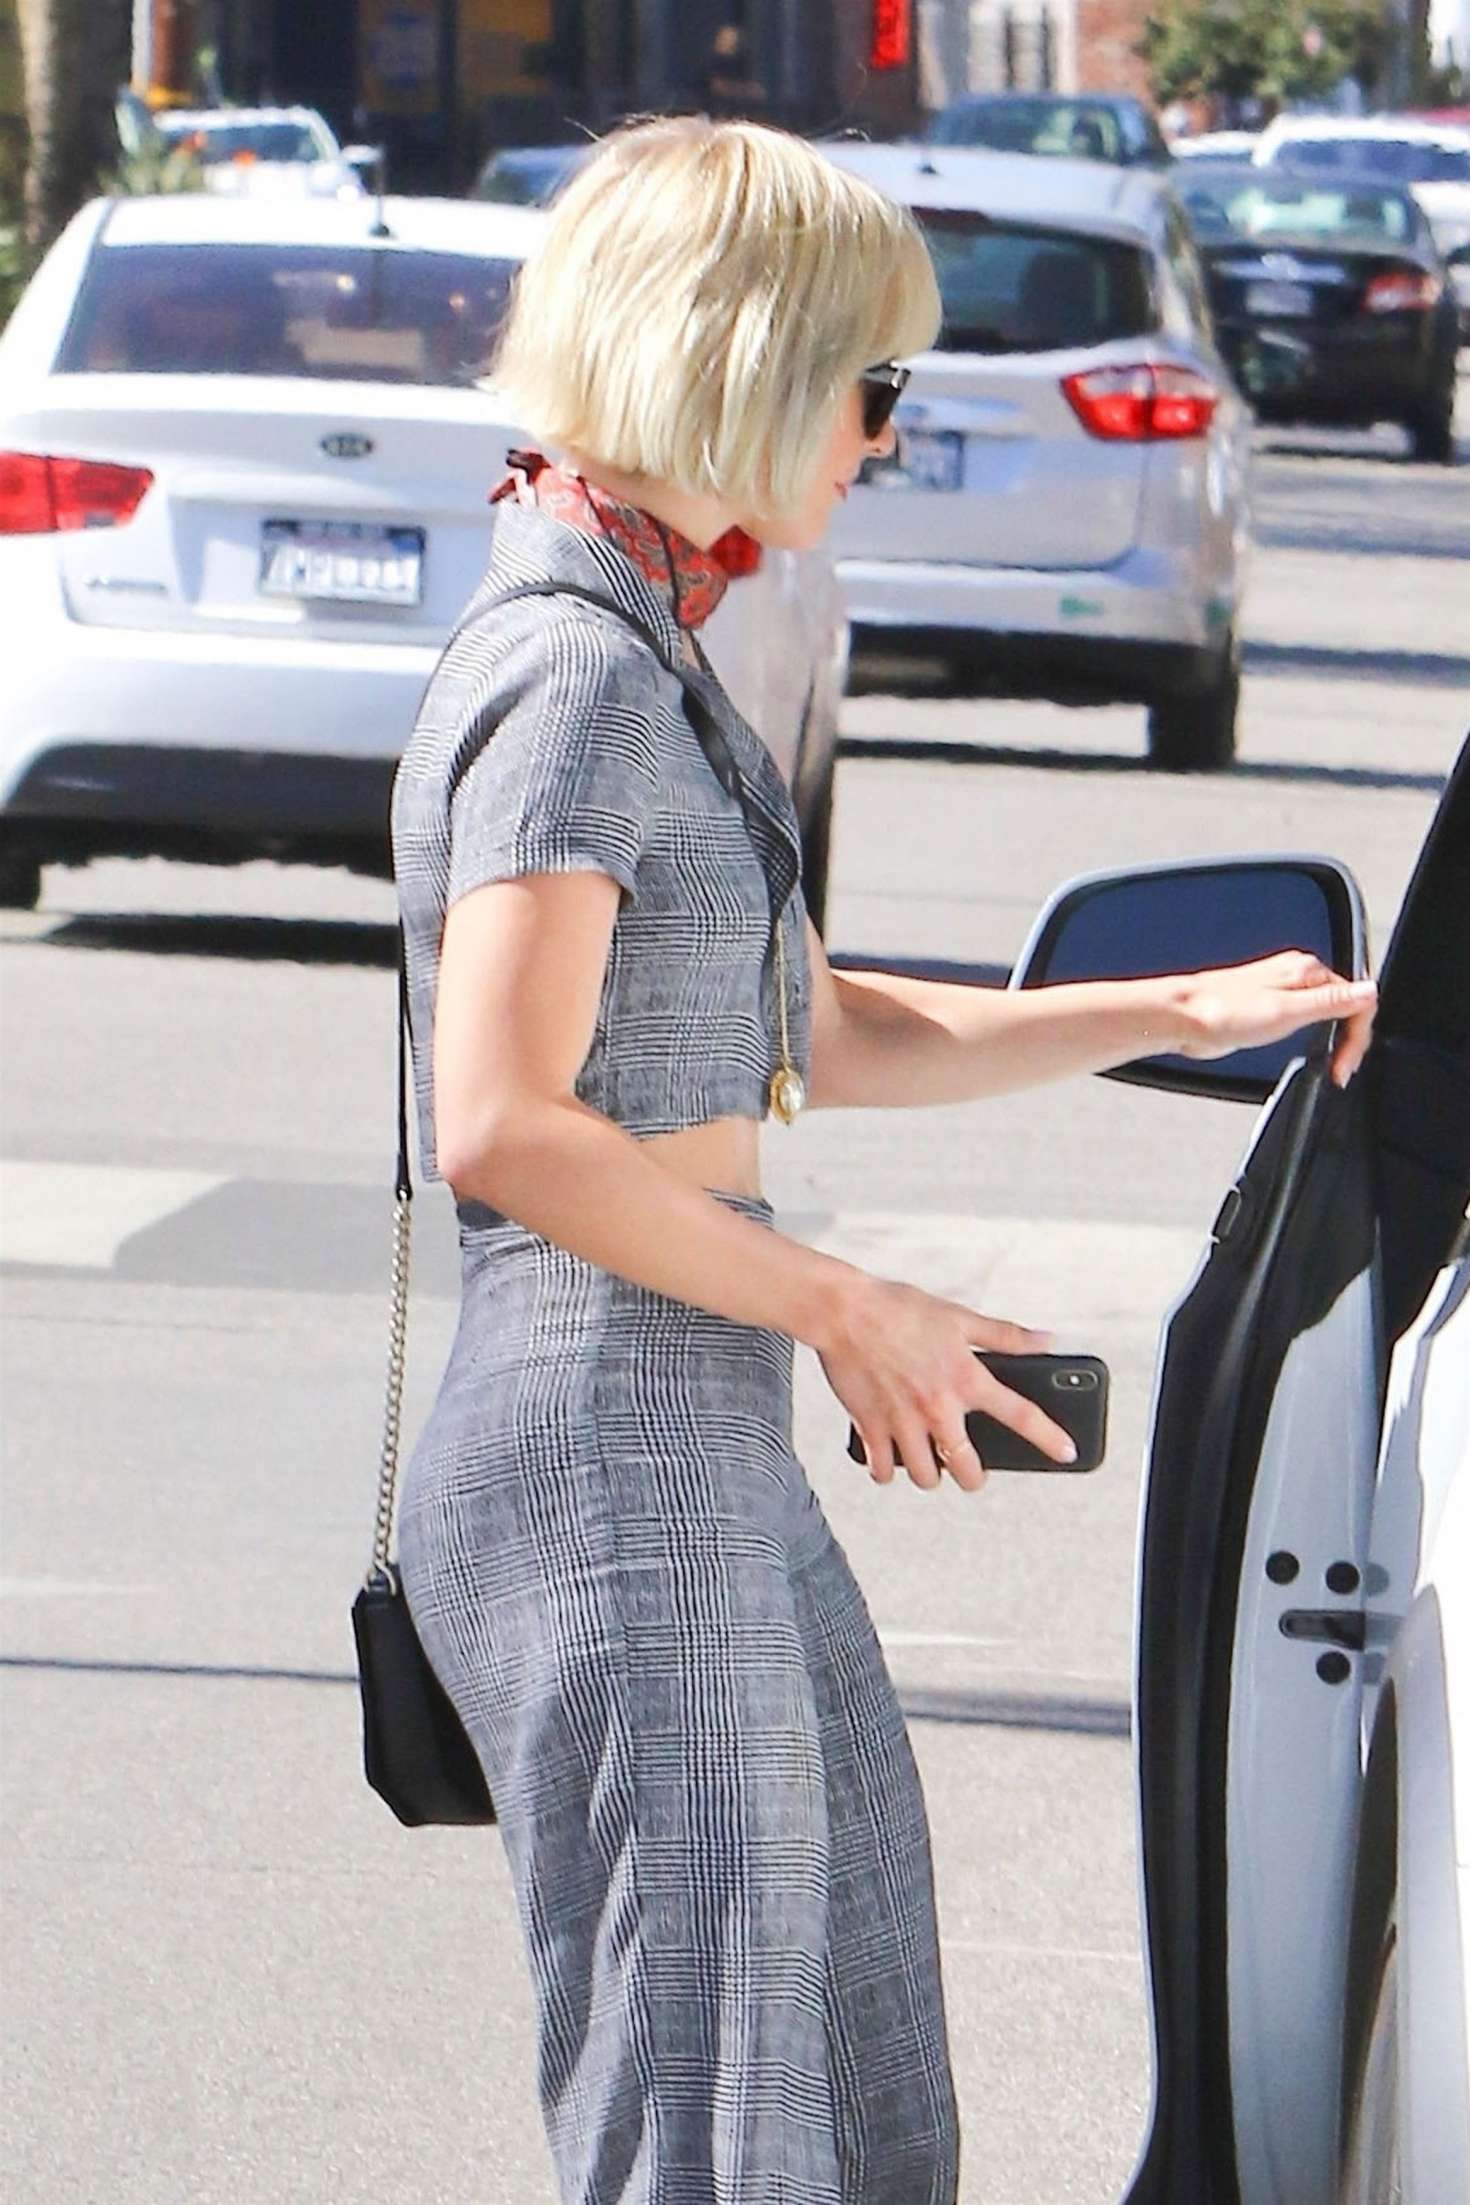 Julianne Hough in a Matching Top and Pants â€“ Leaving a meeting in Studio City